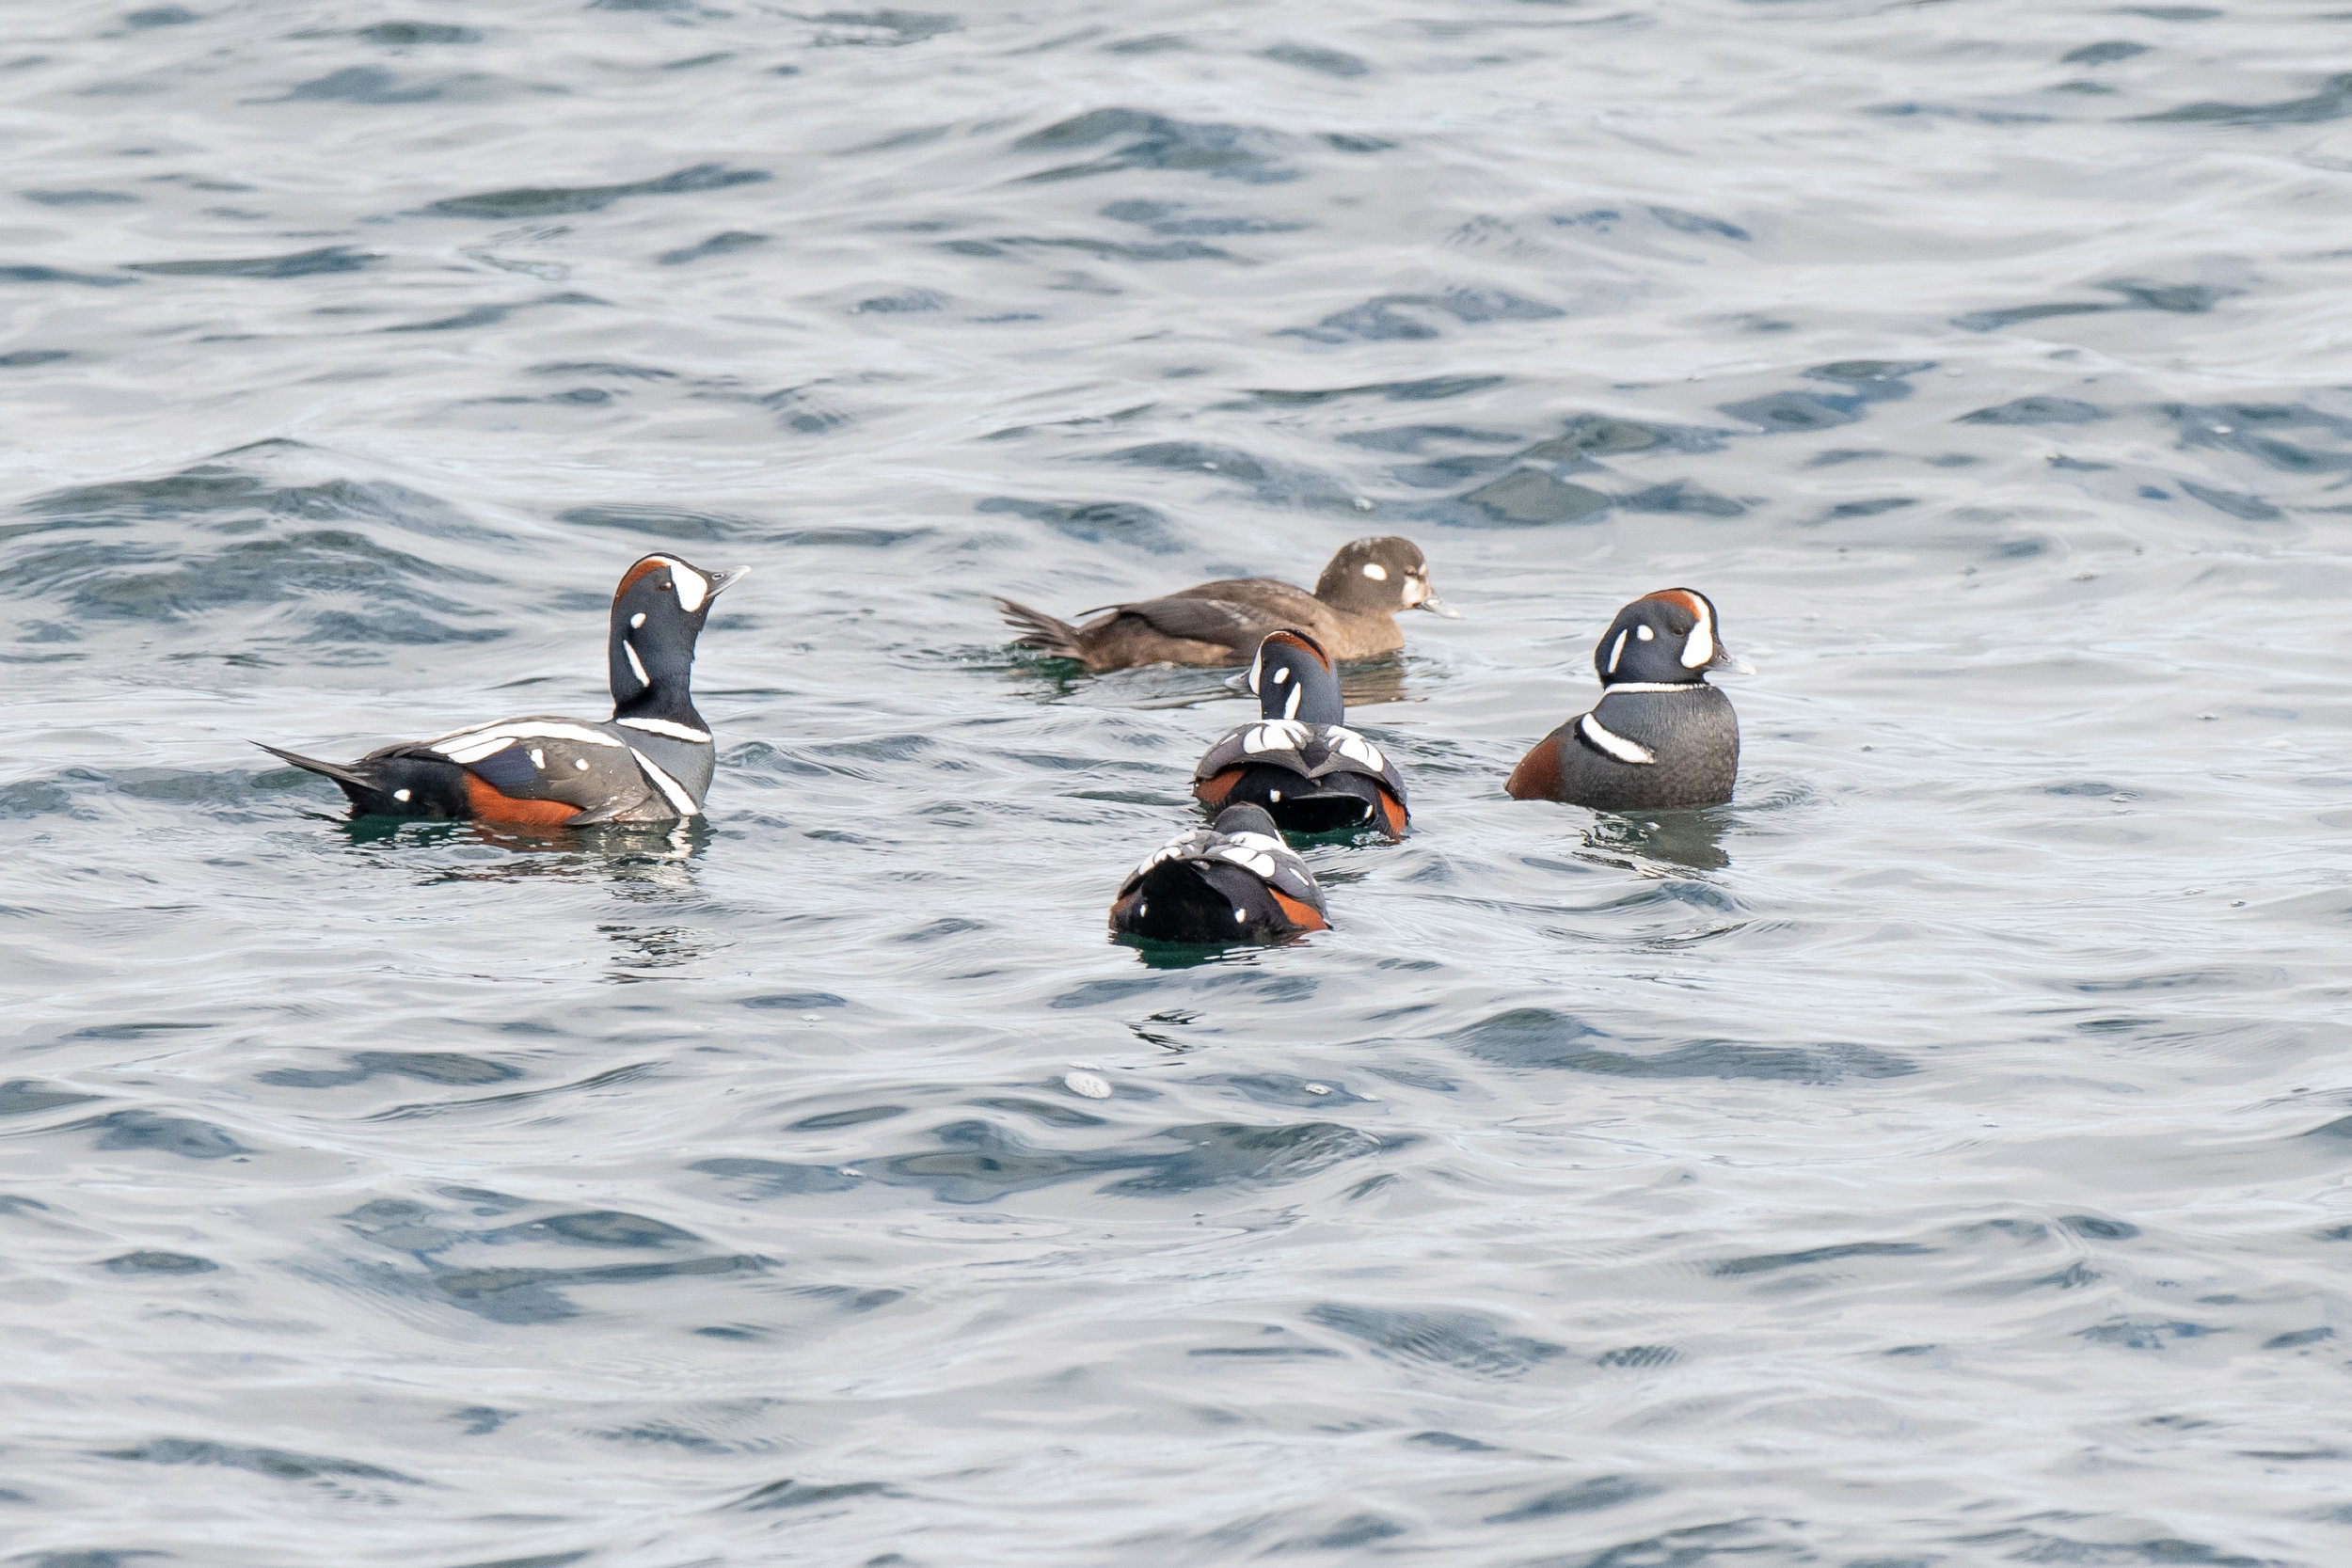   I found these 5 harlequin ducks bobbing near the rocks in Ogunquit Maine yesterday. They winter along the New England coast and are spectacular to see. They are smaller than wood ducks.   